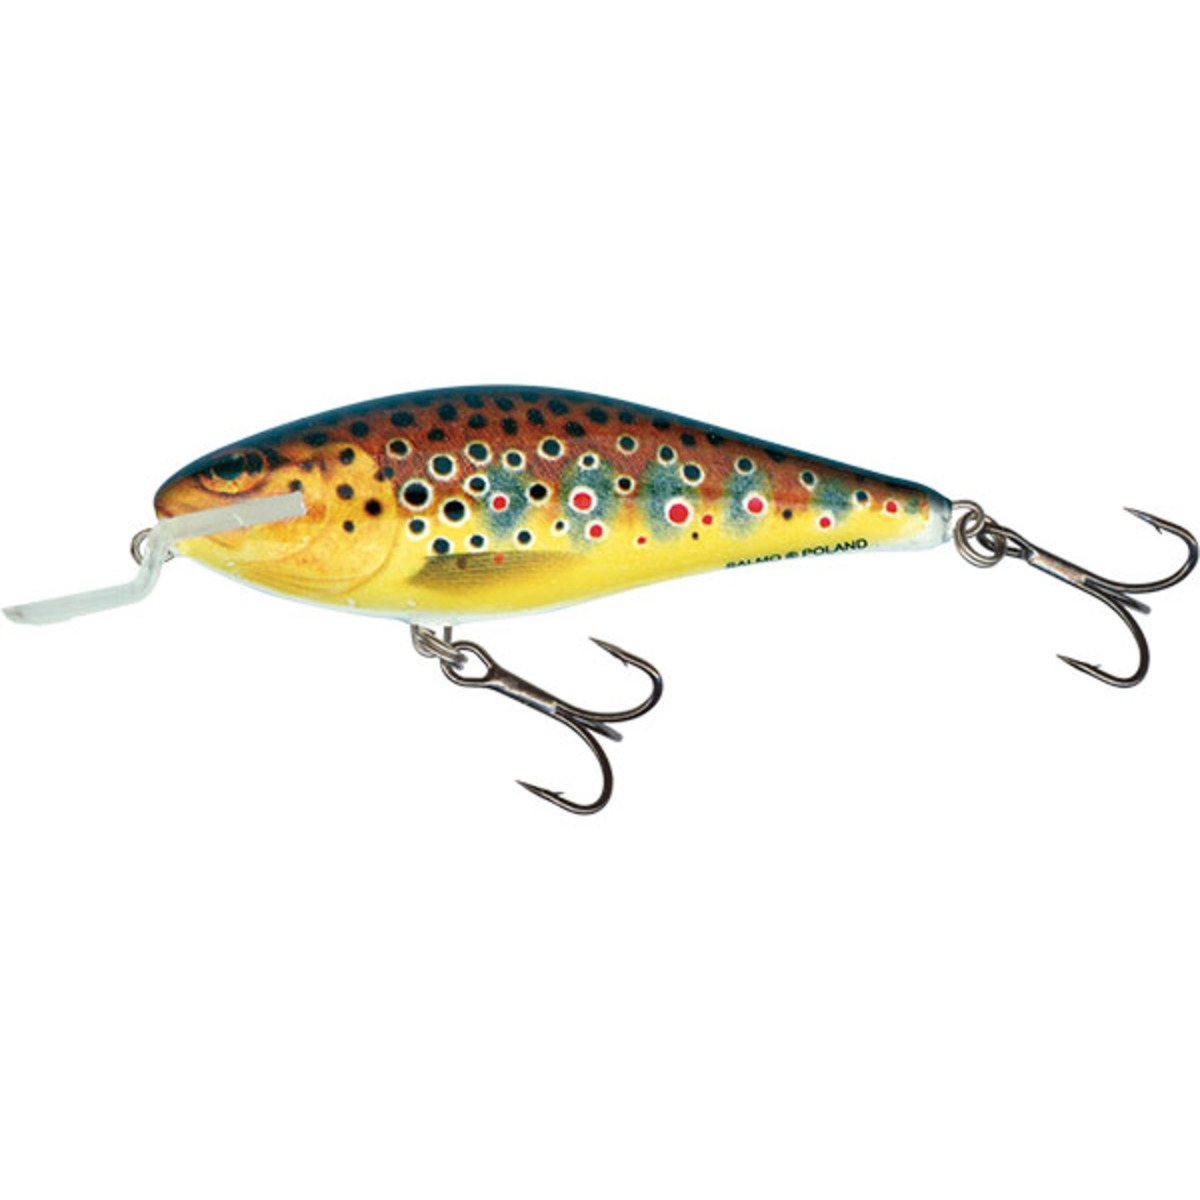 Salmo Executor Shallow Runner - 5 Cm - Trout